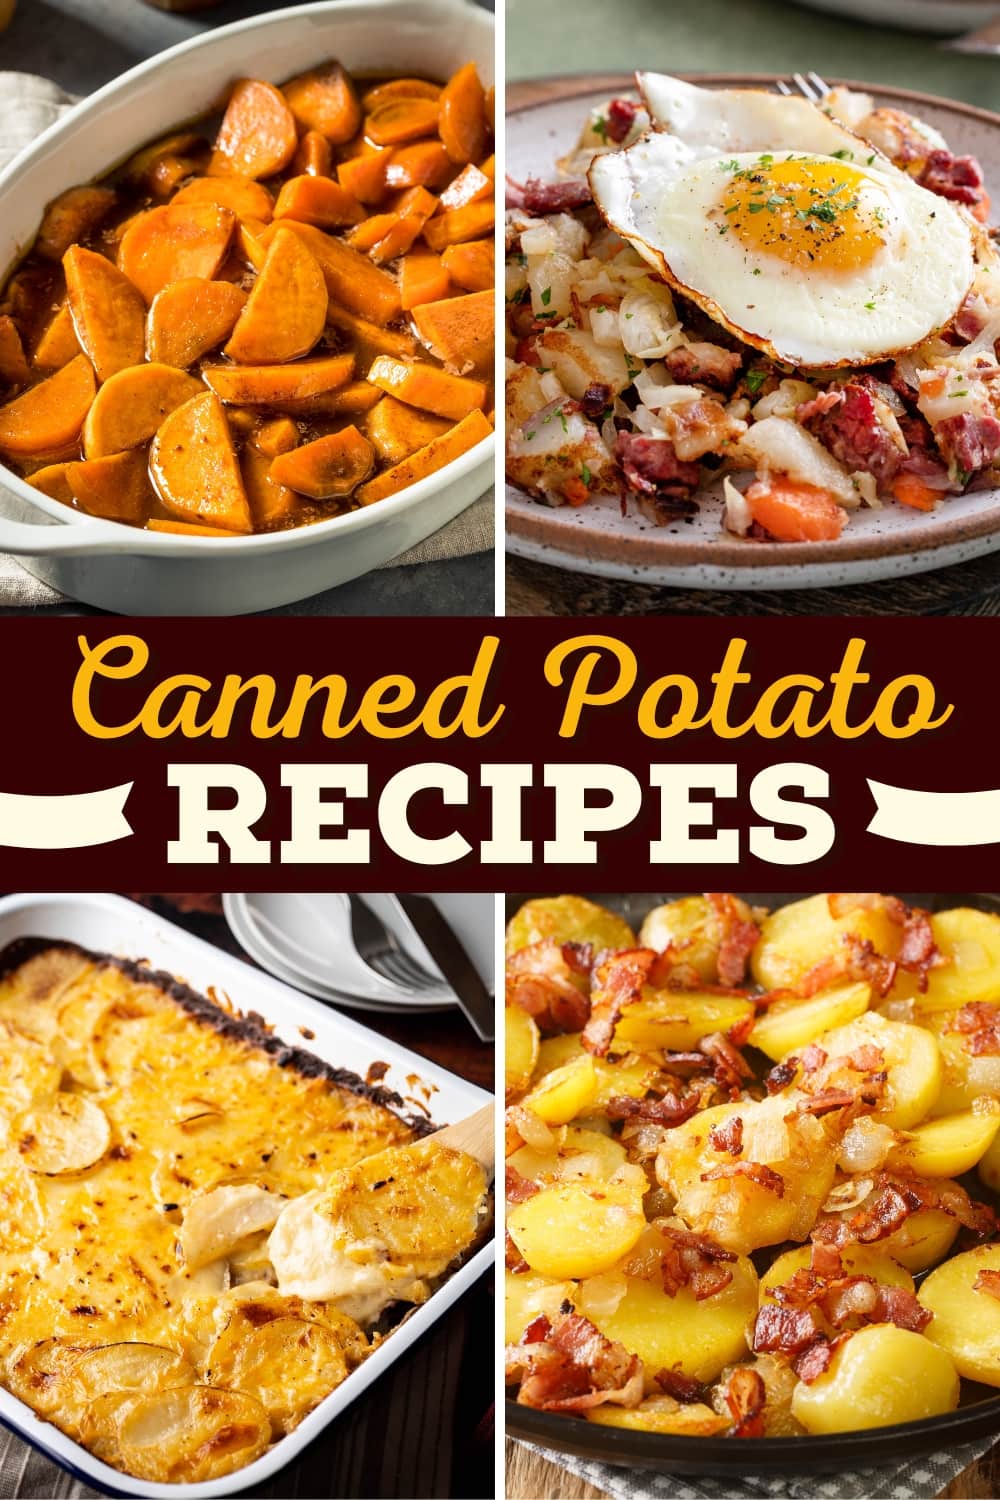 27 Canned Potato Recipes for Easy and Amazing Meals - Insanely Good